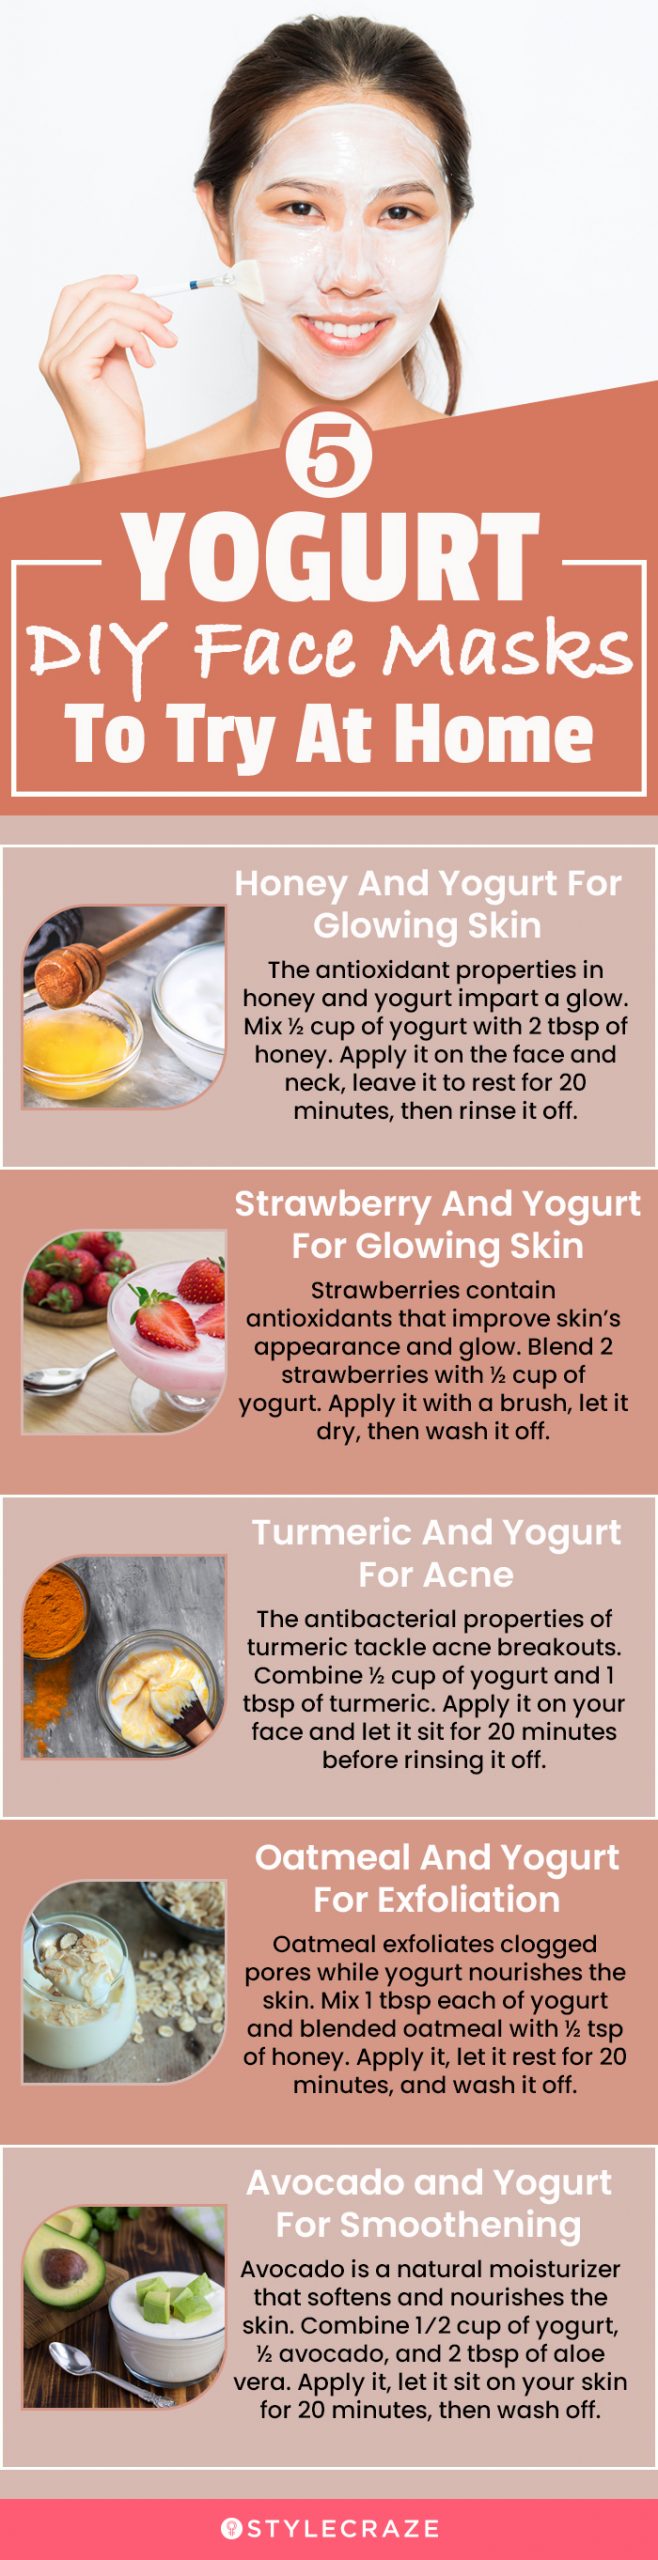 5 yogurt diy face masks to try at home (infographic)